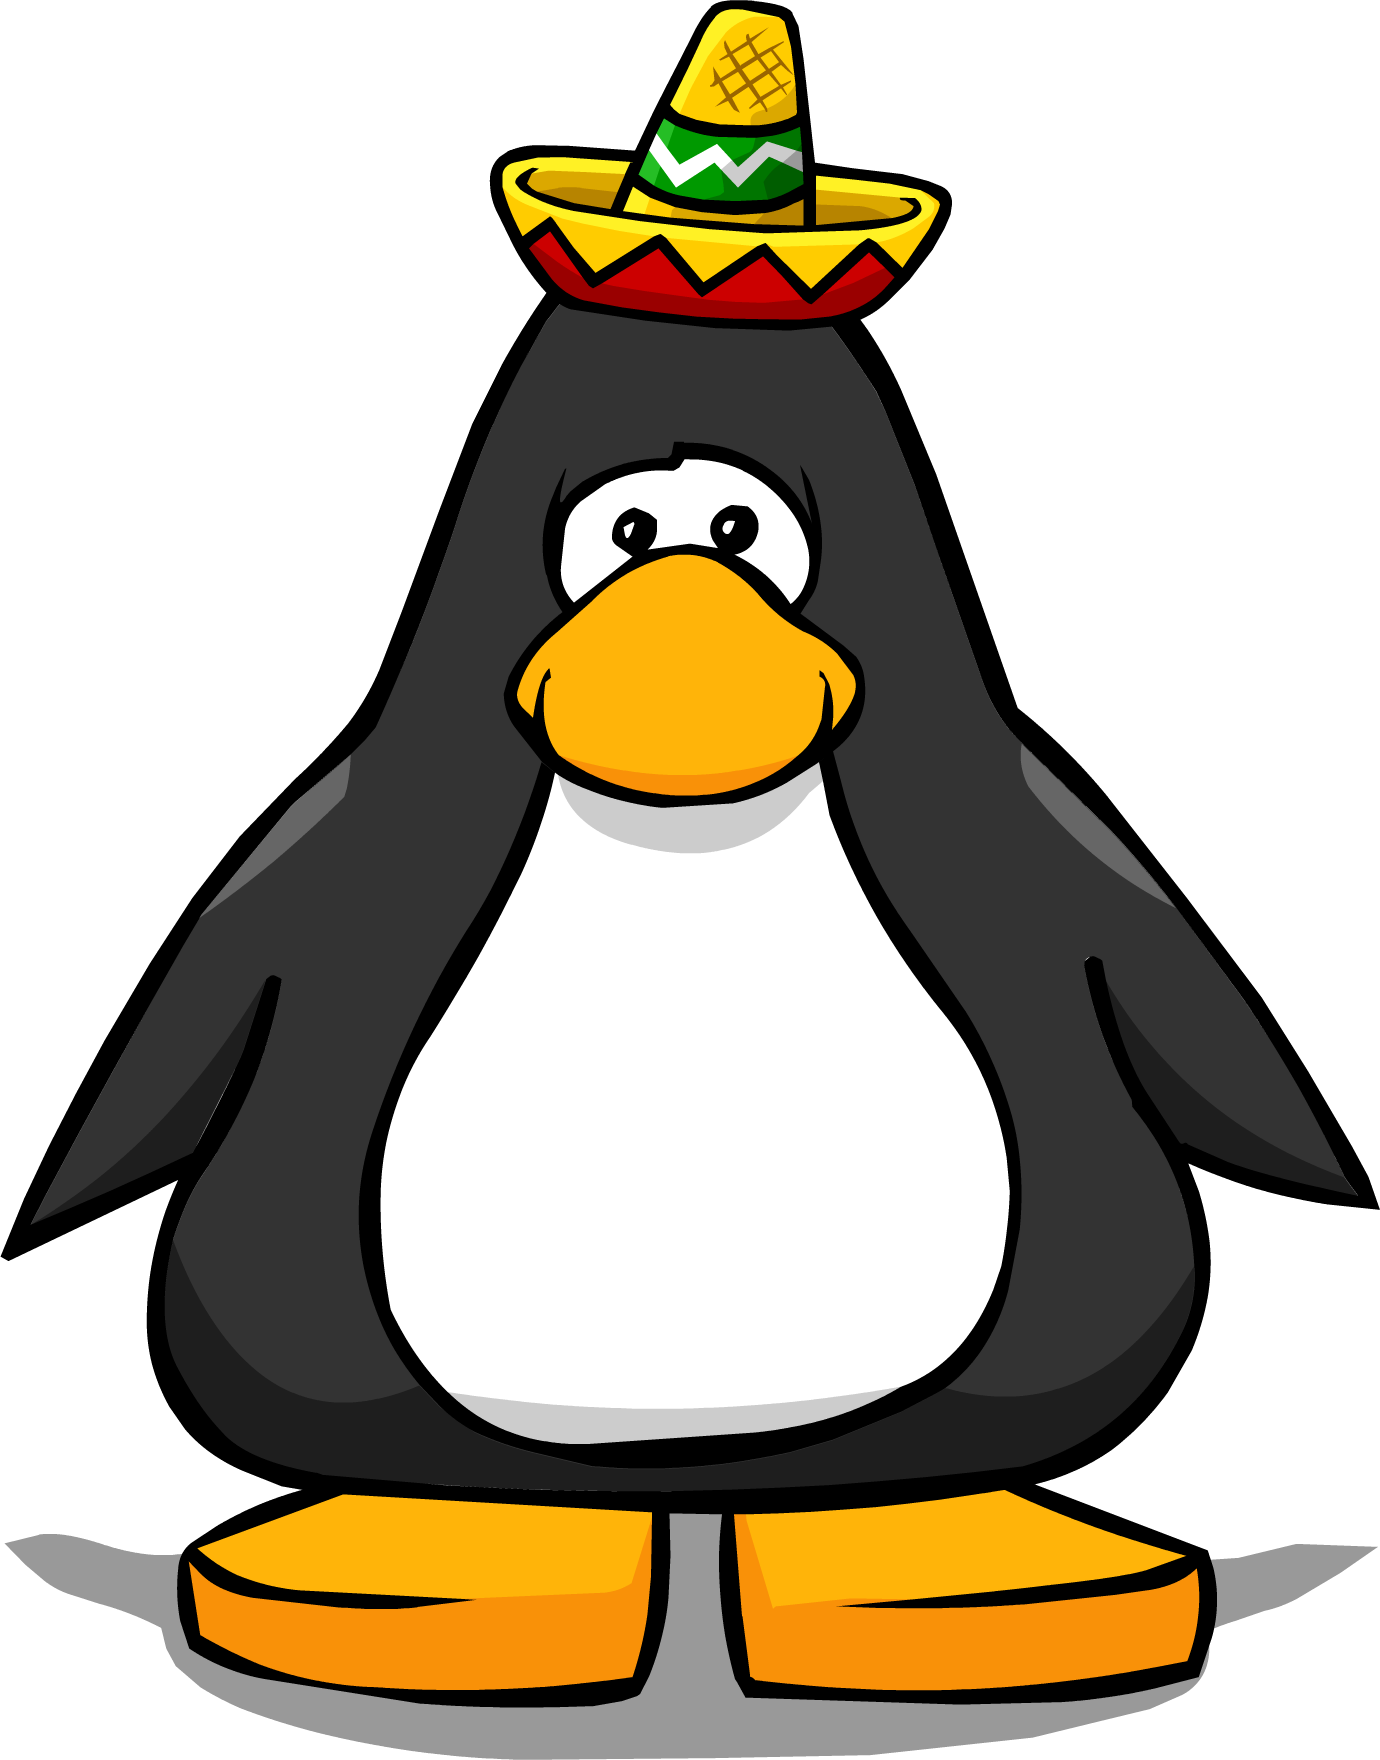 Mini Sombrero From A Player Card - Penguin With Top Hat (1380x1760)